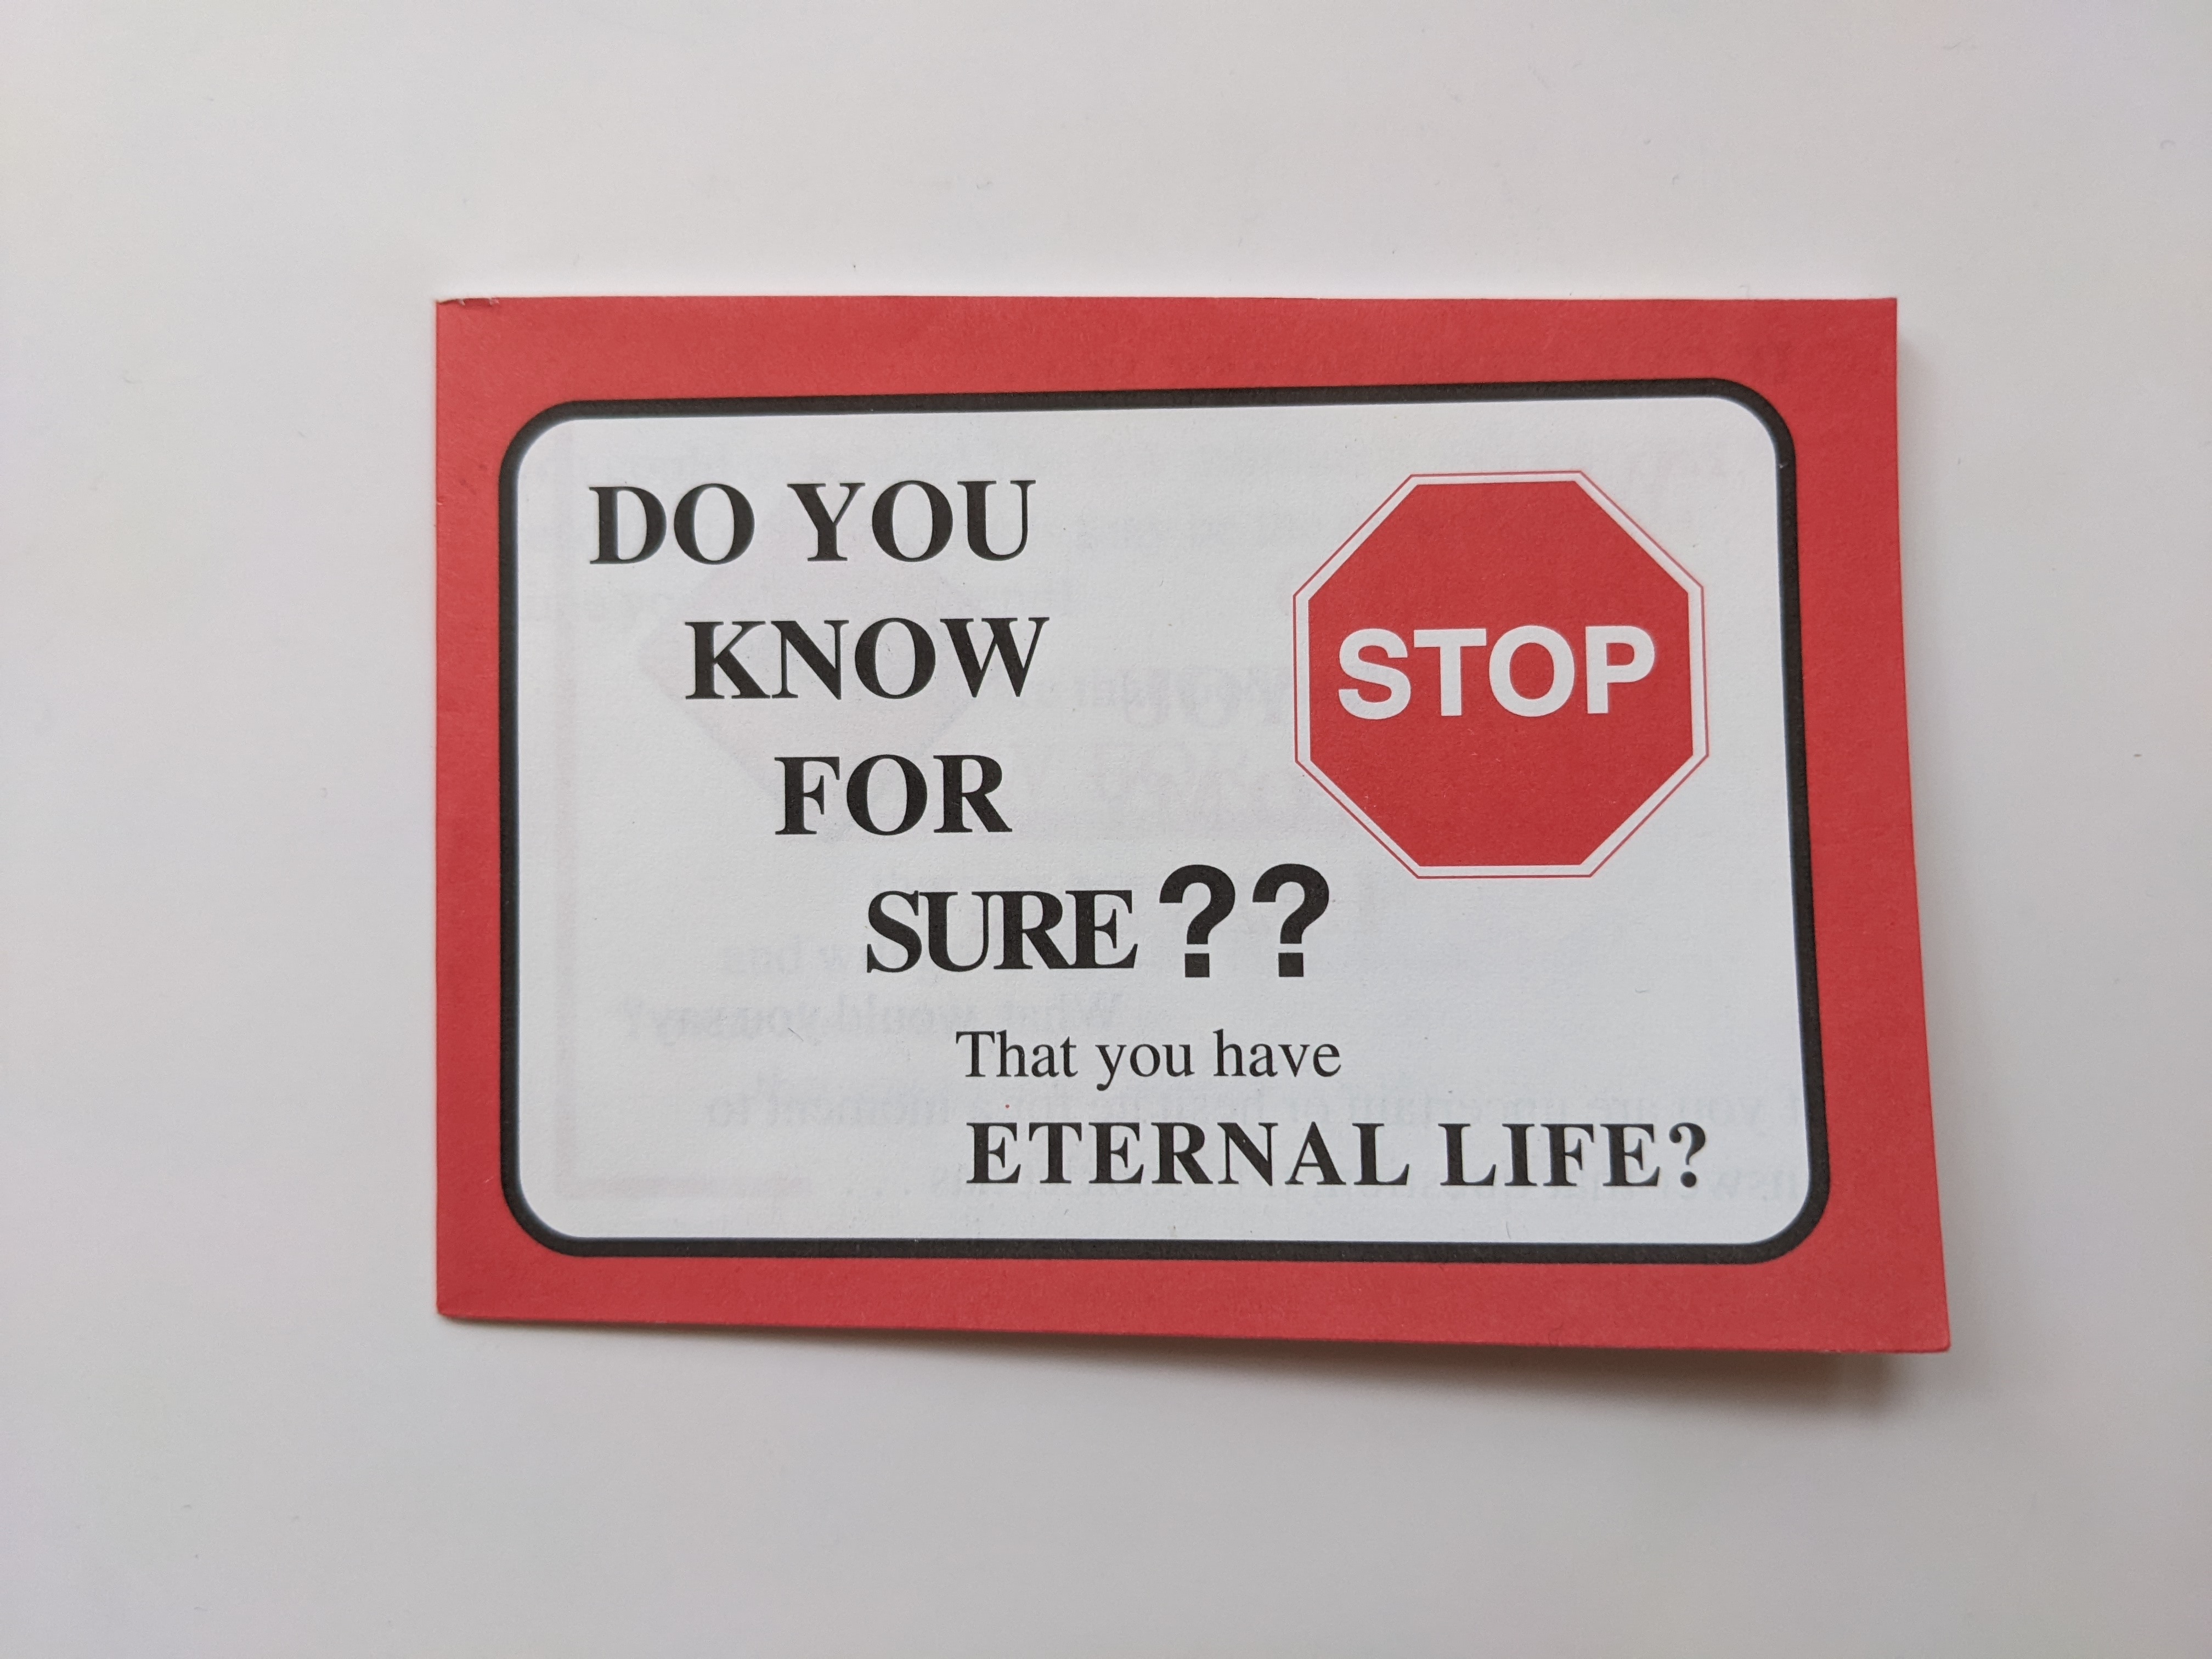 Do You Know For Sure?? That you have Eternal Life?